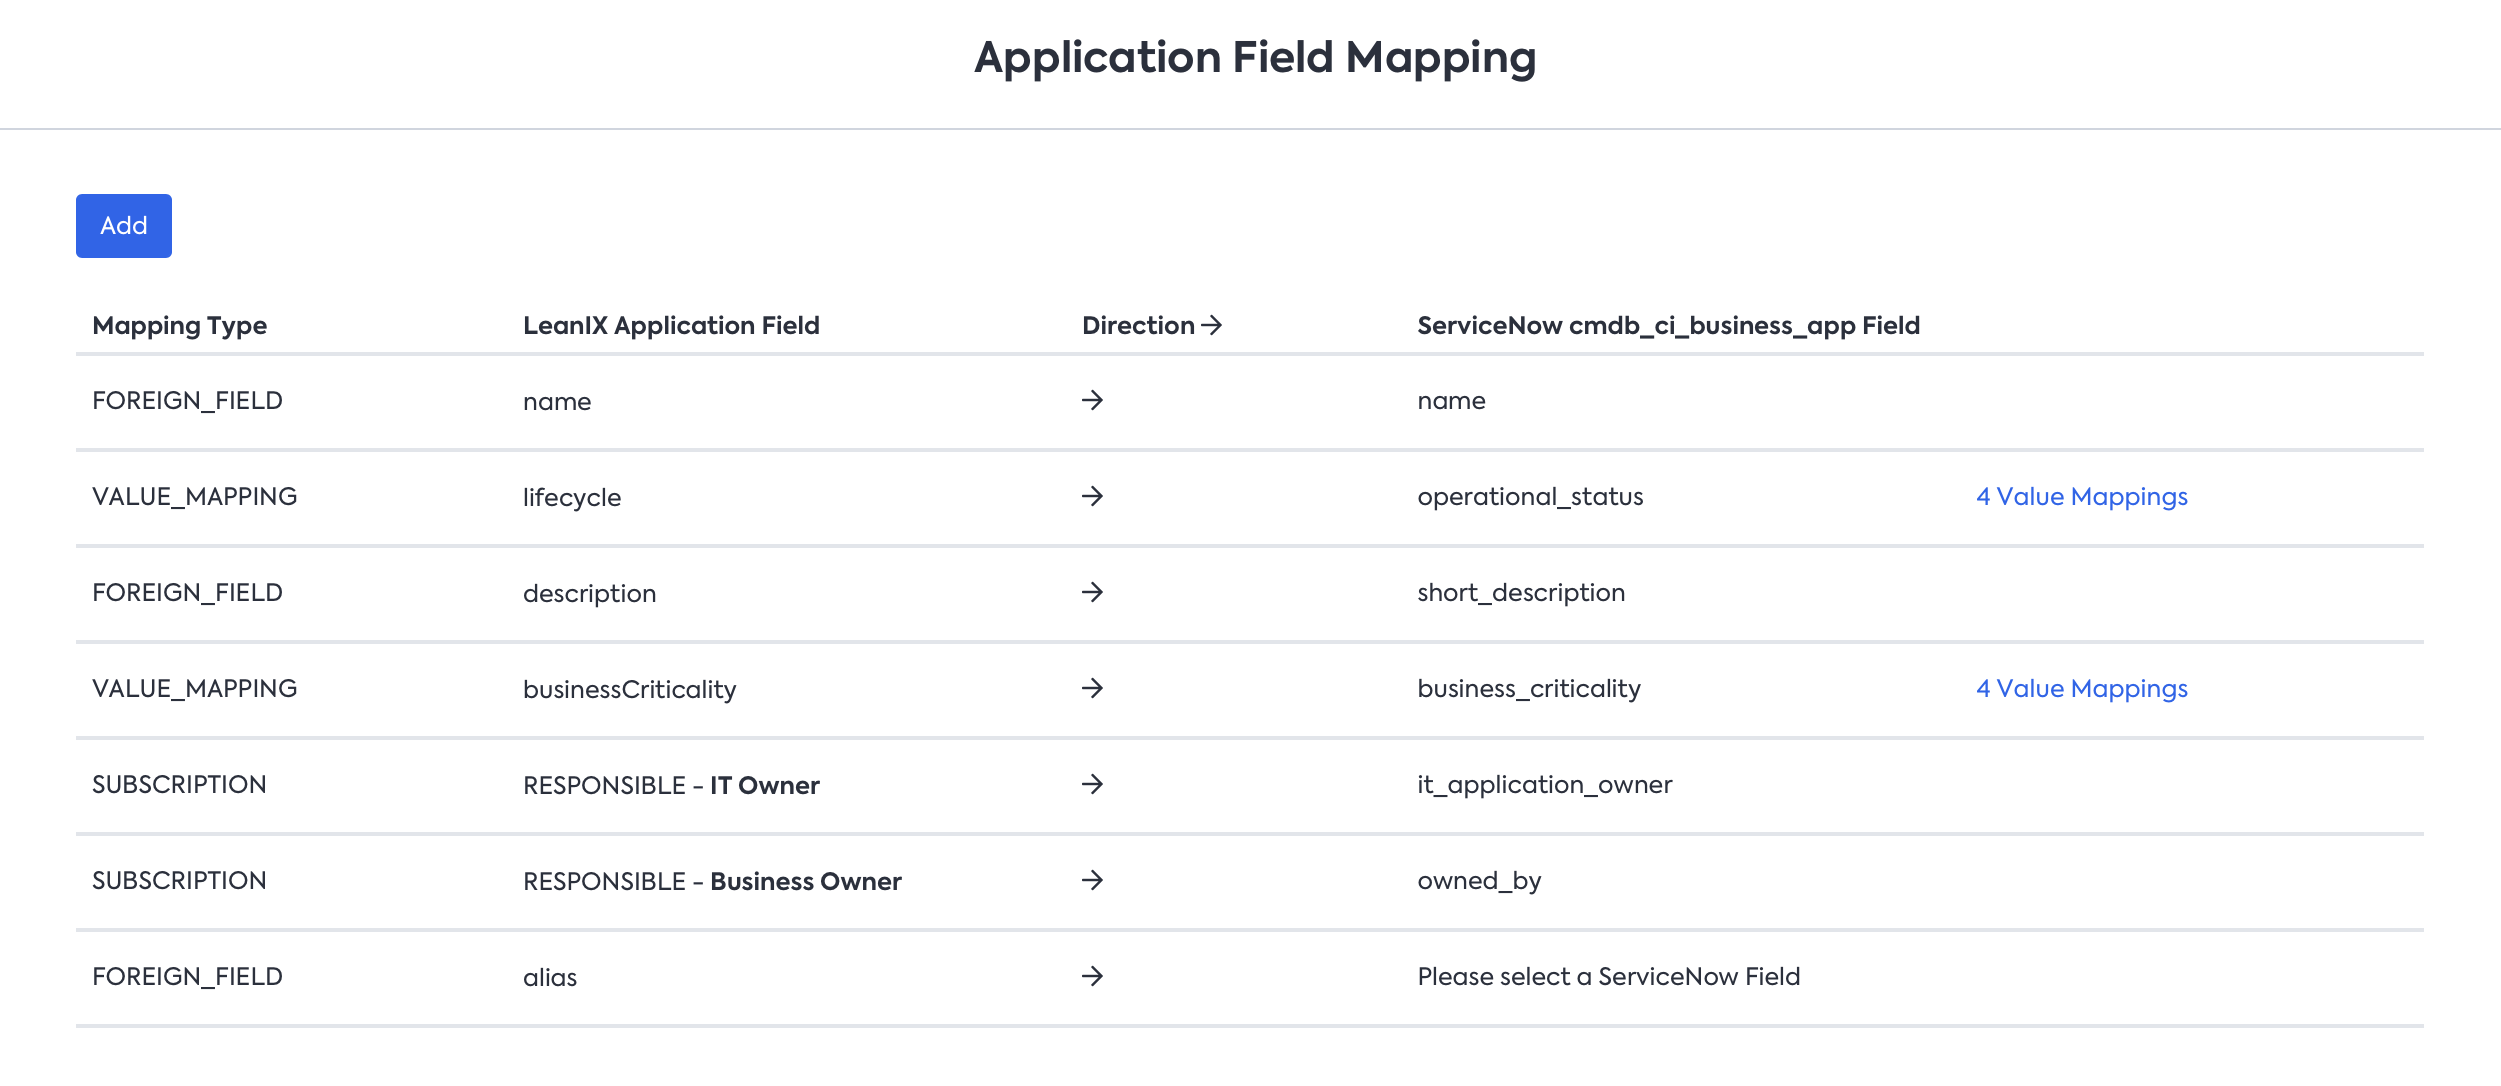 Field-level mapping keys between LeanIX and ServiceNow